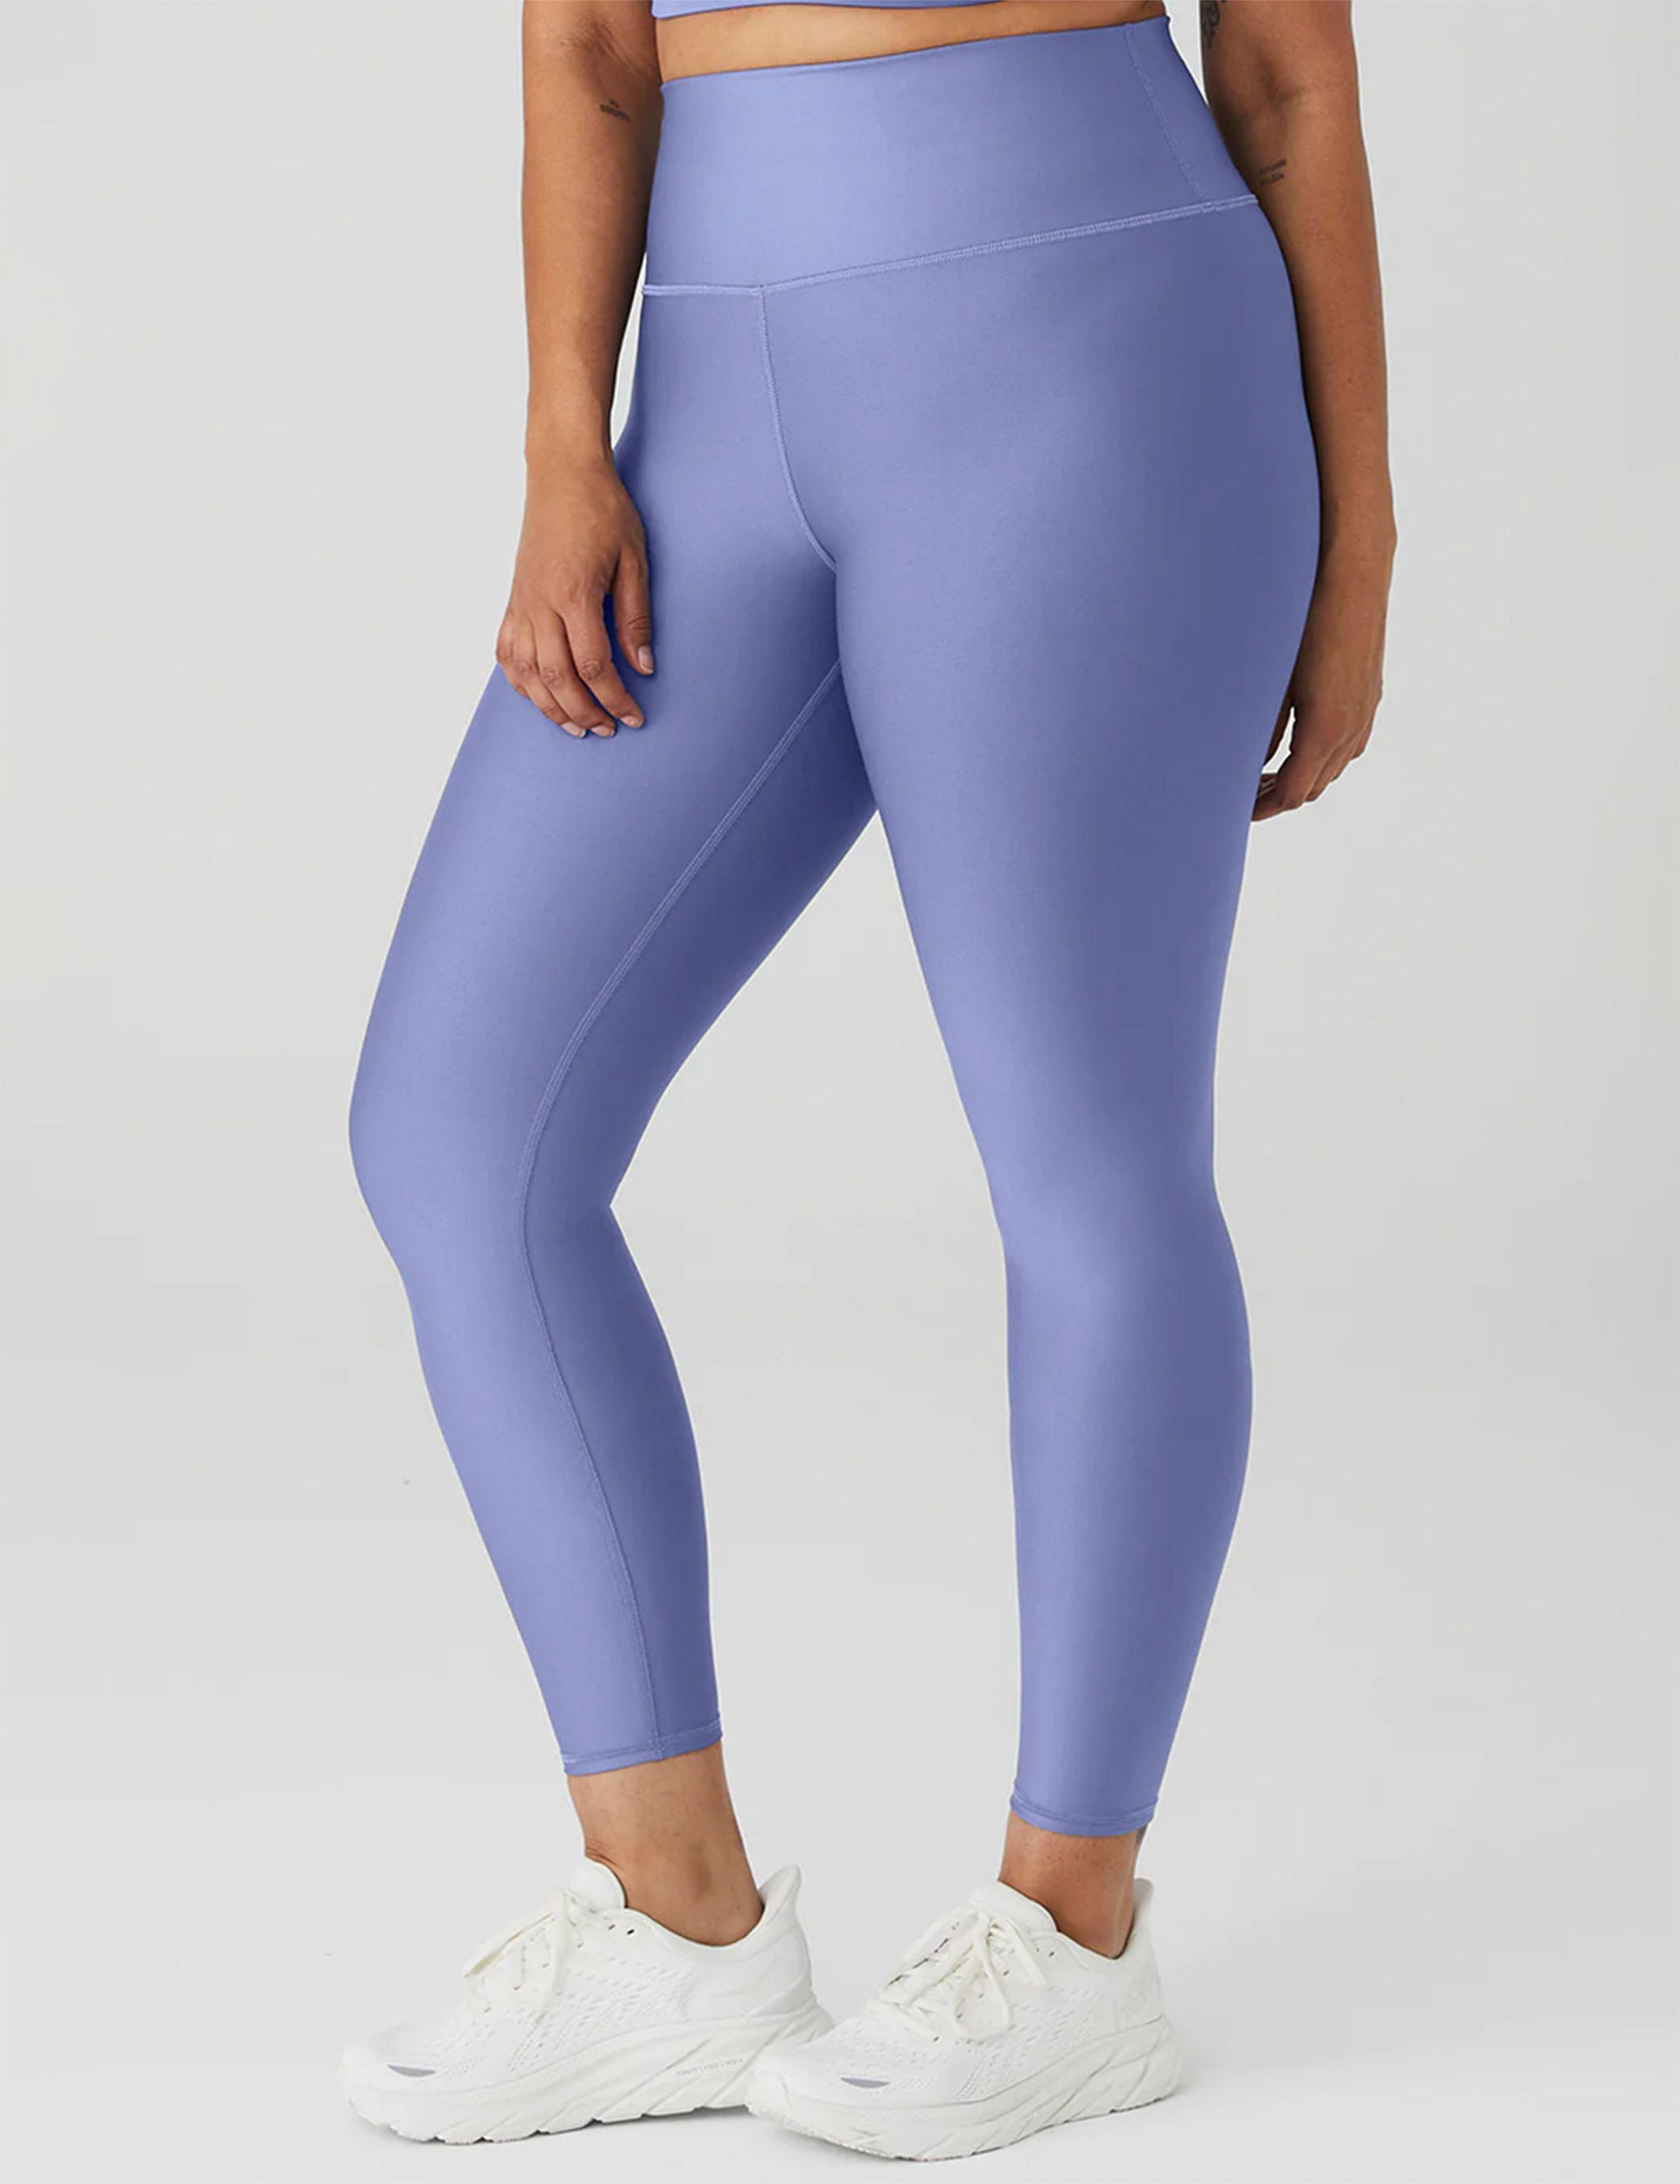 ALO YOGA Airlift All Access cutout stretch leggings